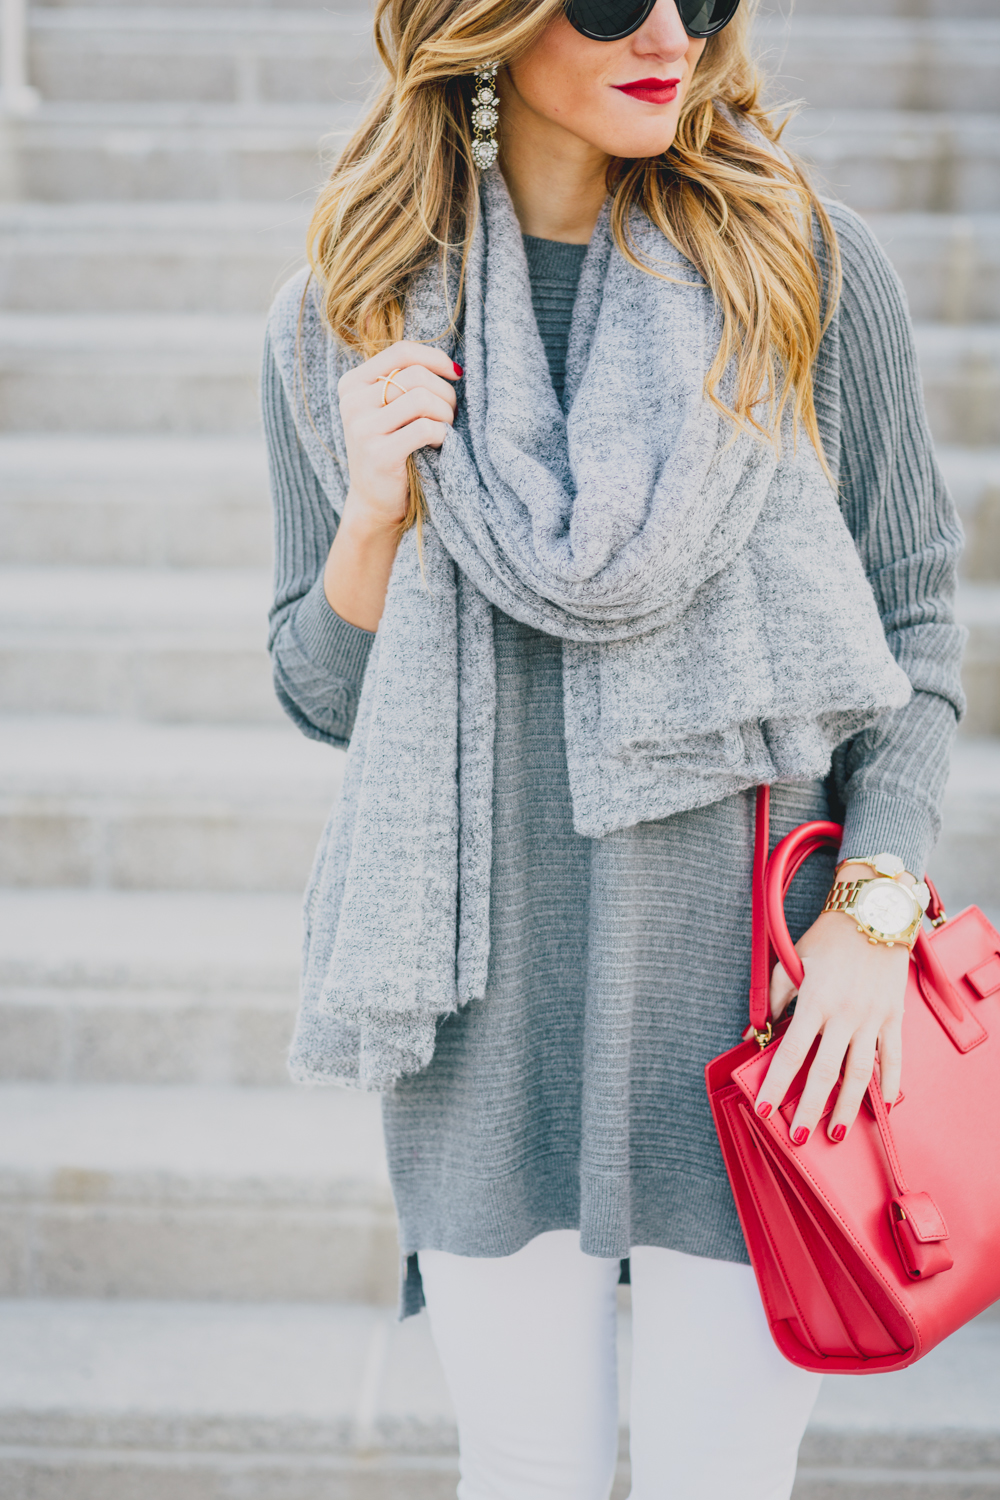 Oversized Grey Sweater + Grey Scarf + White Jeans + Red Pumps 17